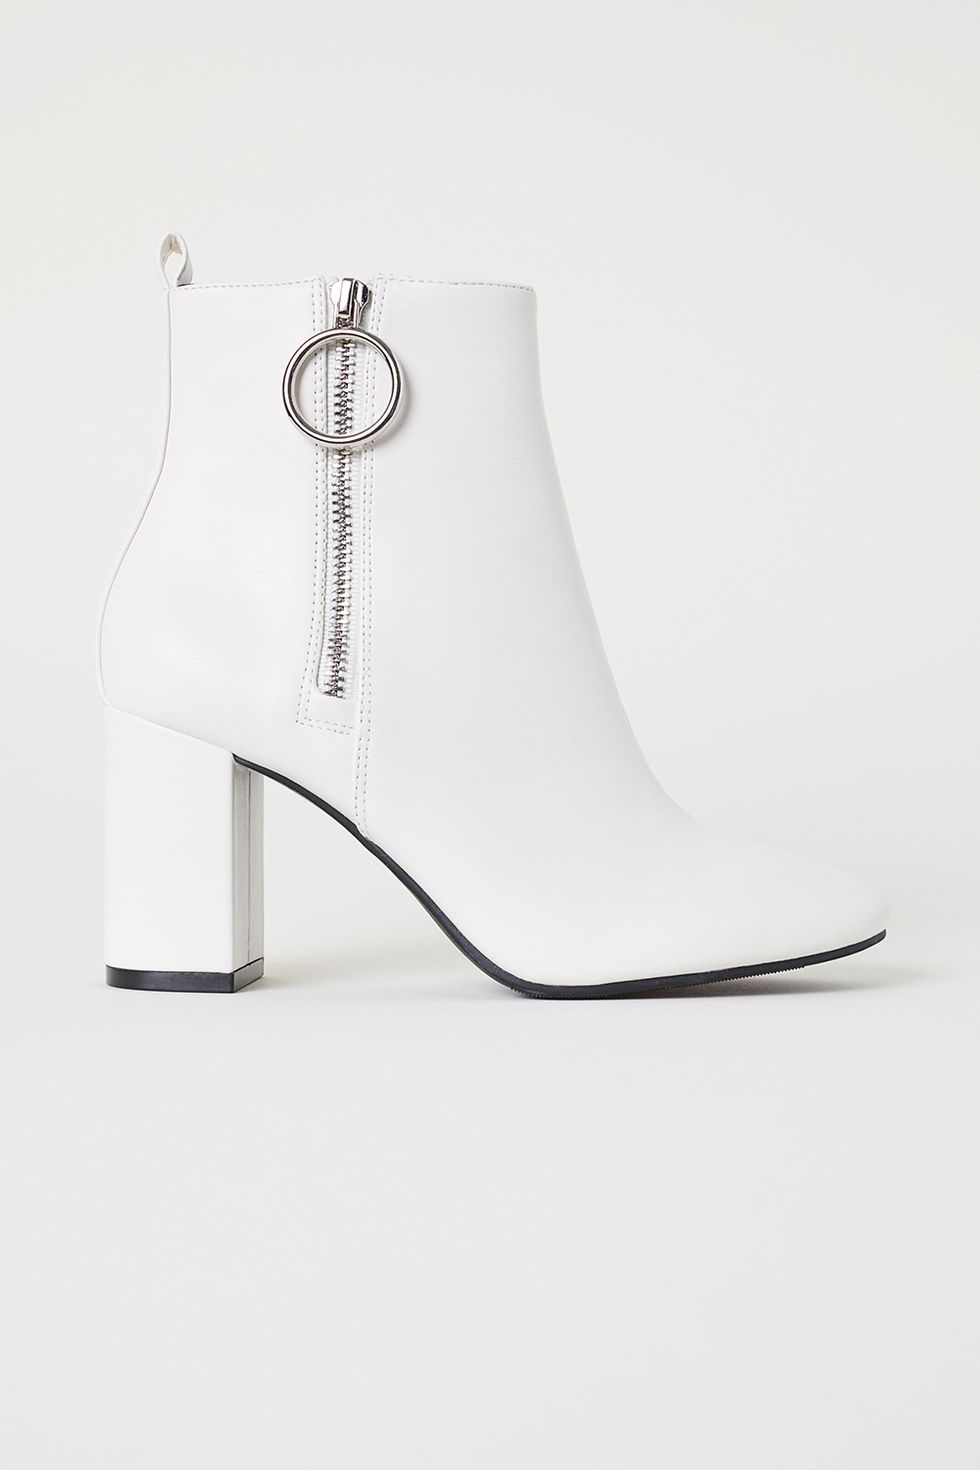 Footwear, White, Shoe, High heels, Joint, Boot, Fashion accessory, Chain, 